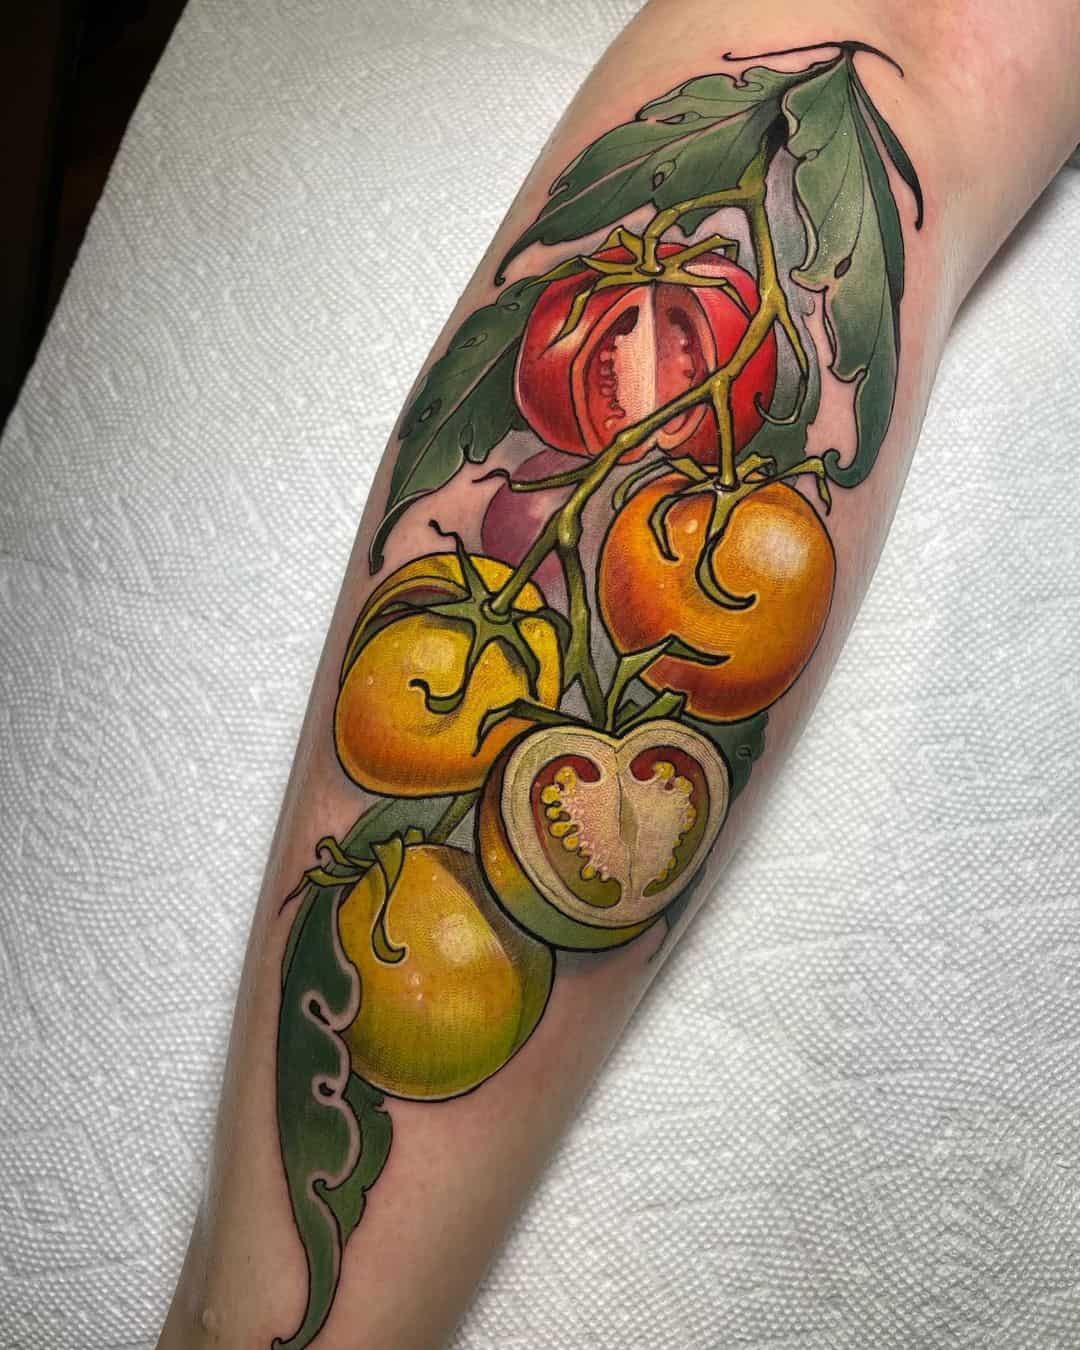 Mezcal and Passionfruit Juice by Chama at Savage Ink in Casablanca, Morocco  : r/tattoos